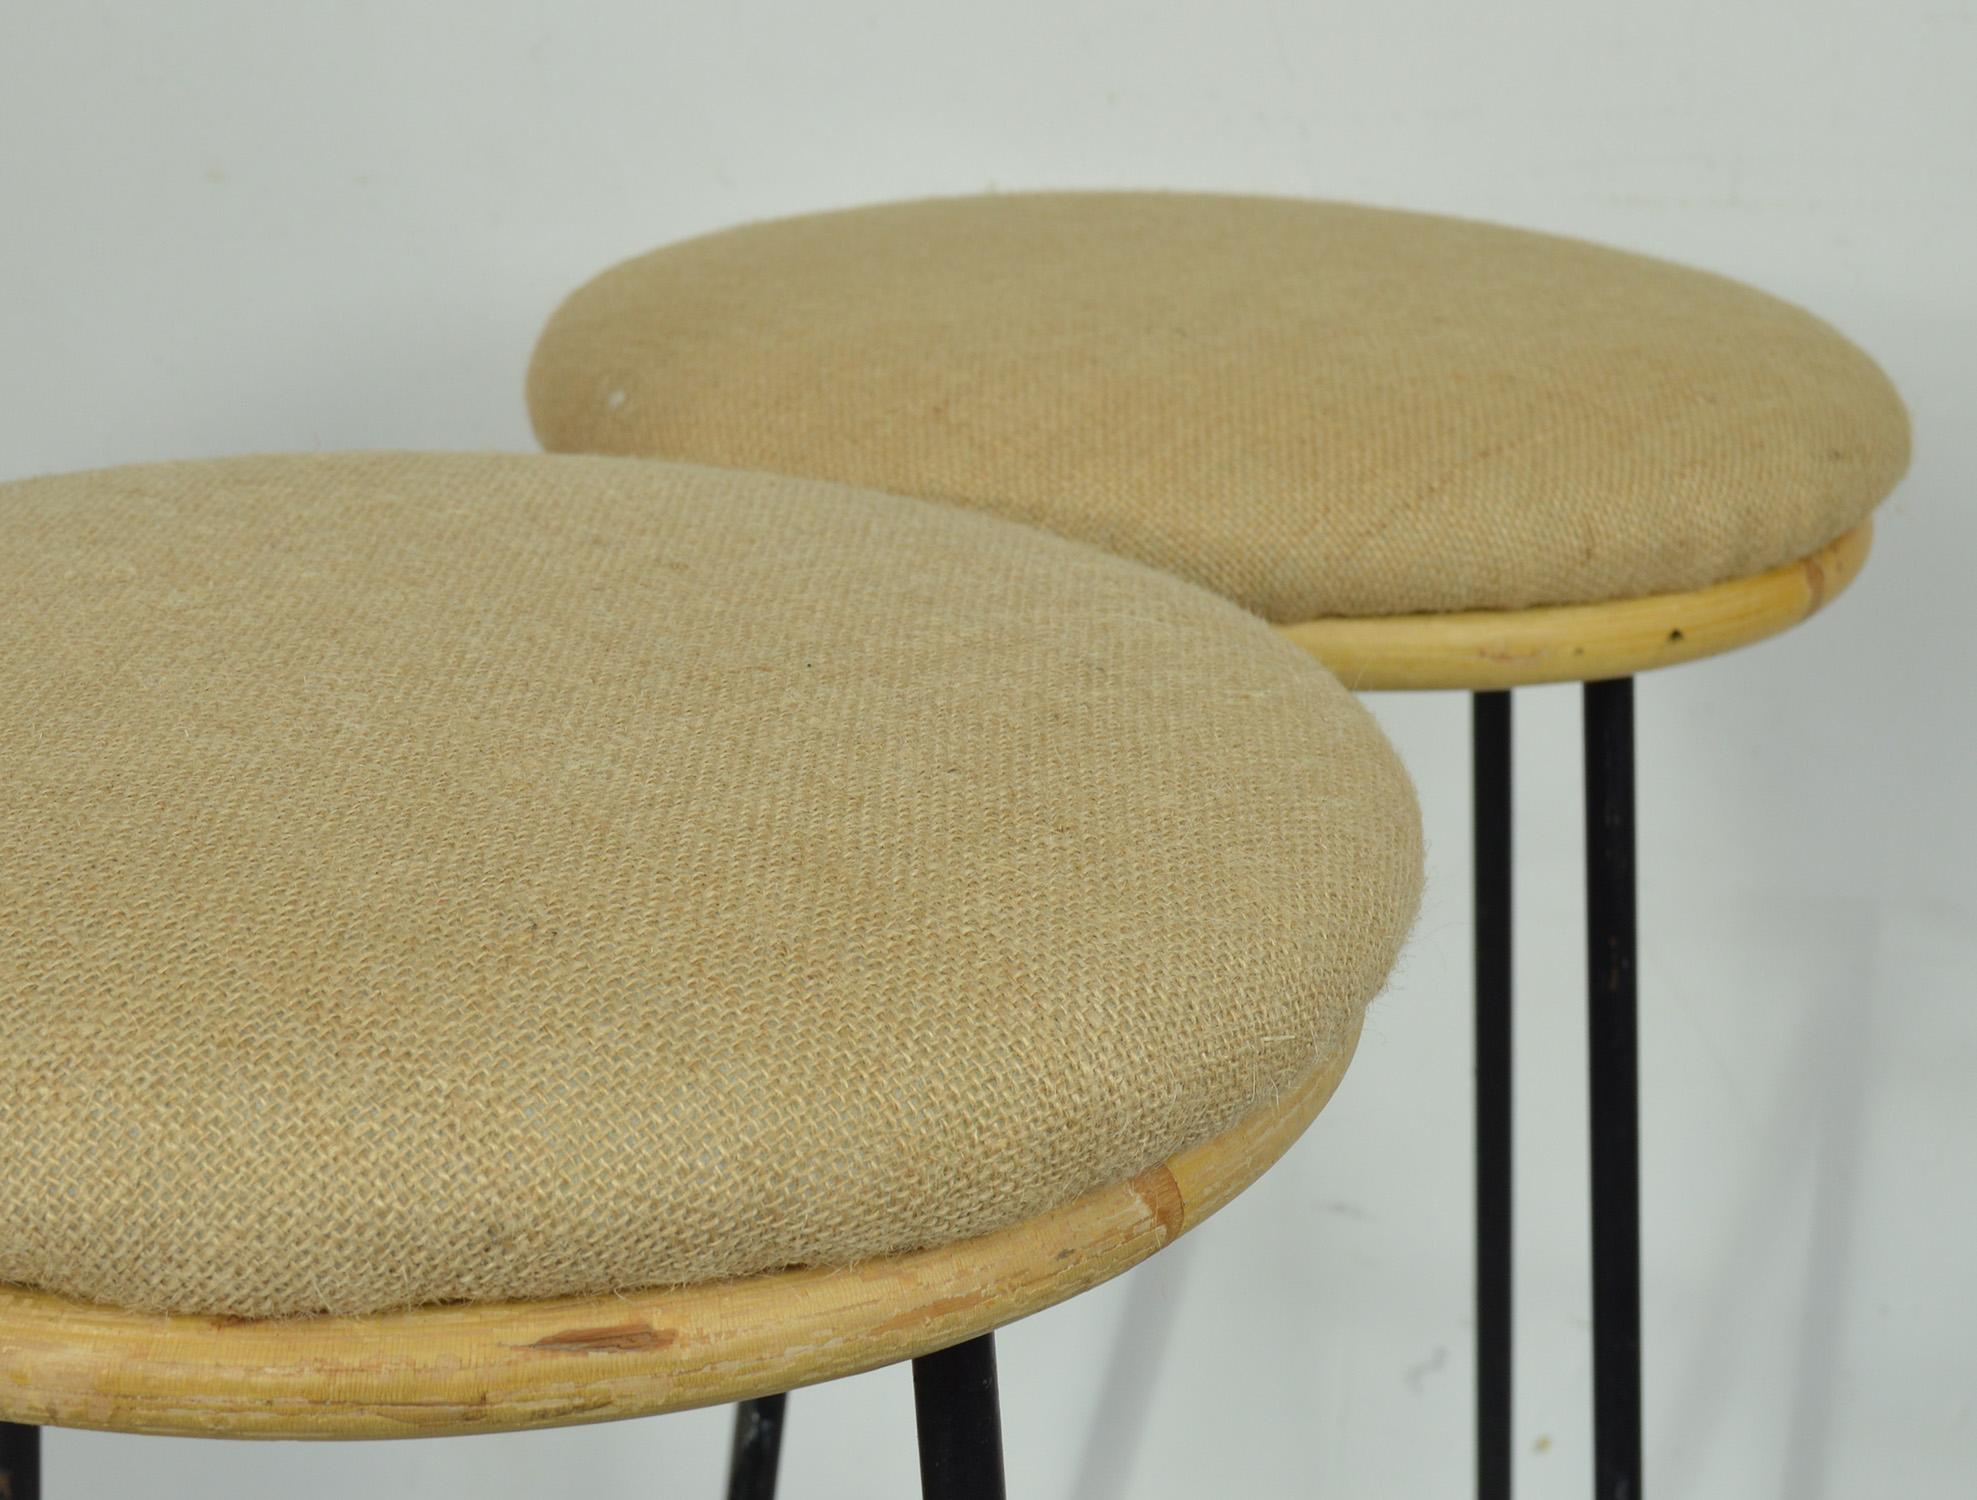 Pair of Midcentury Metal and Bamboo Bar Stools, 1950s (Italienisch)